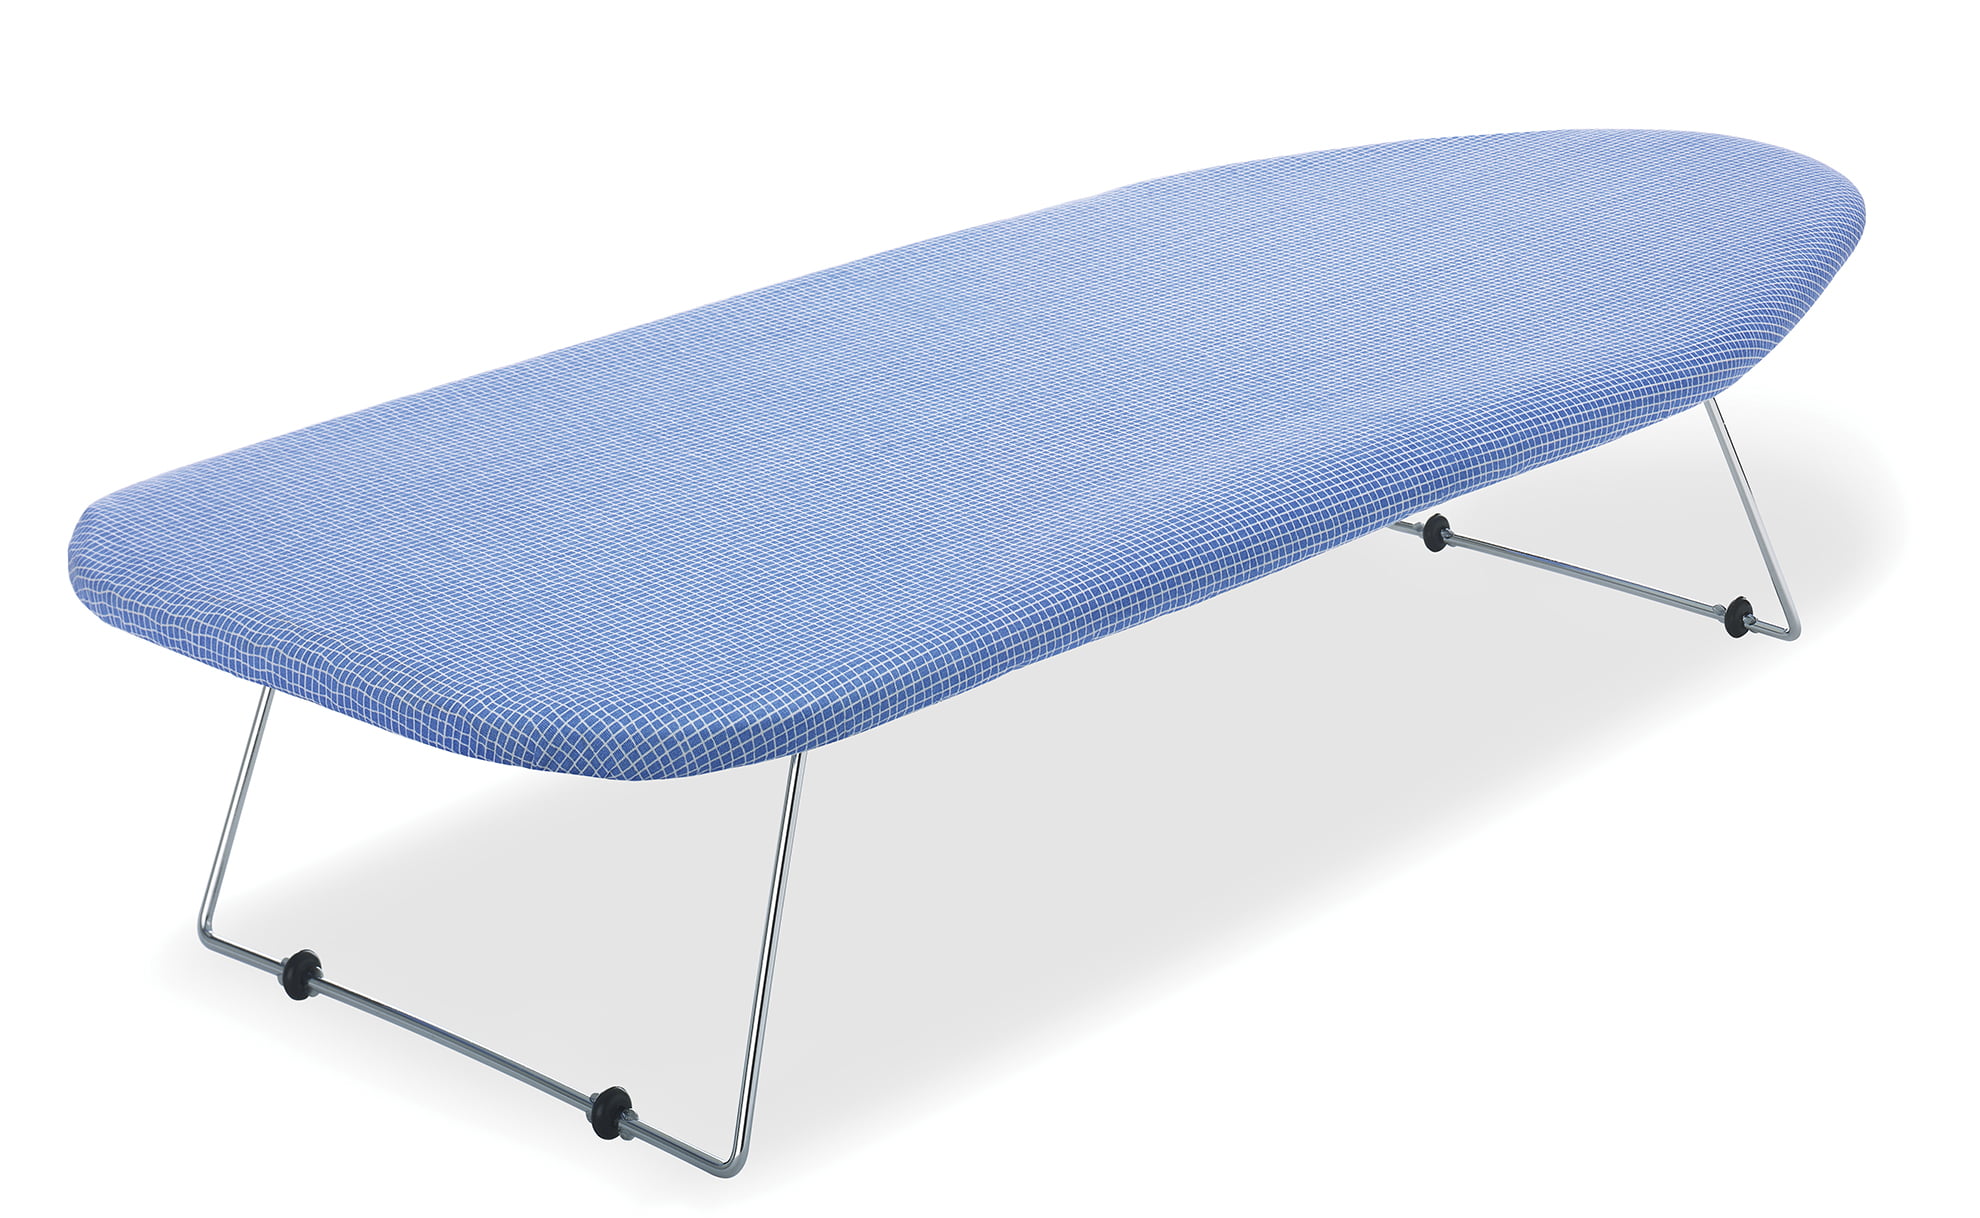 Mini Portable Table Top Ironing Board with Folding Legs 12 by 30" 